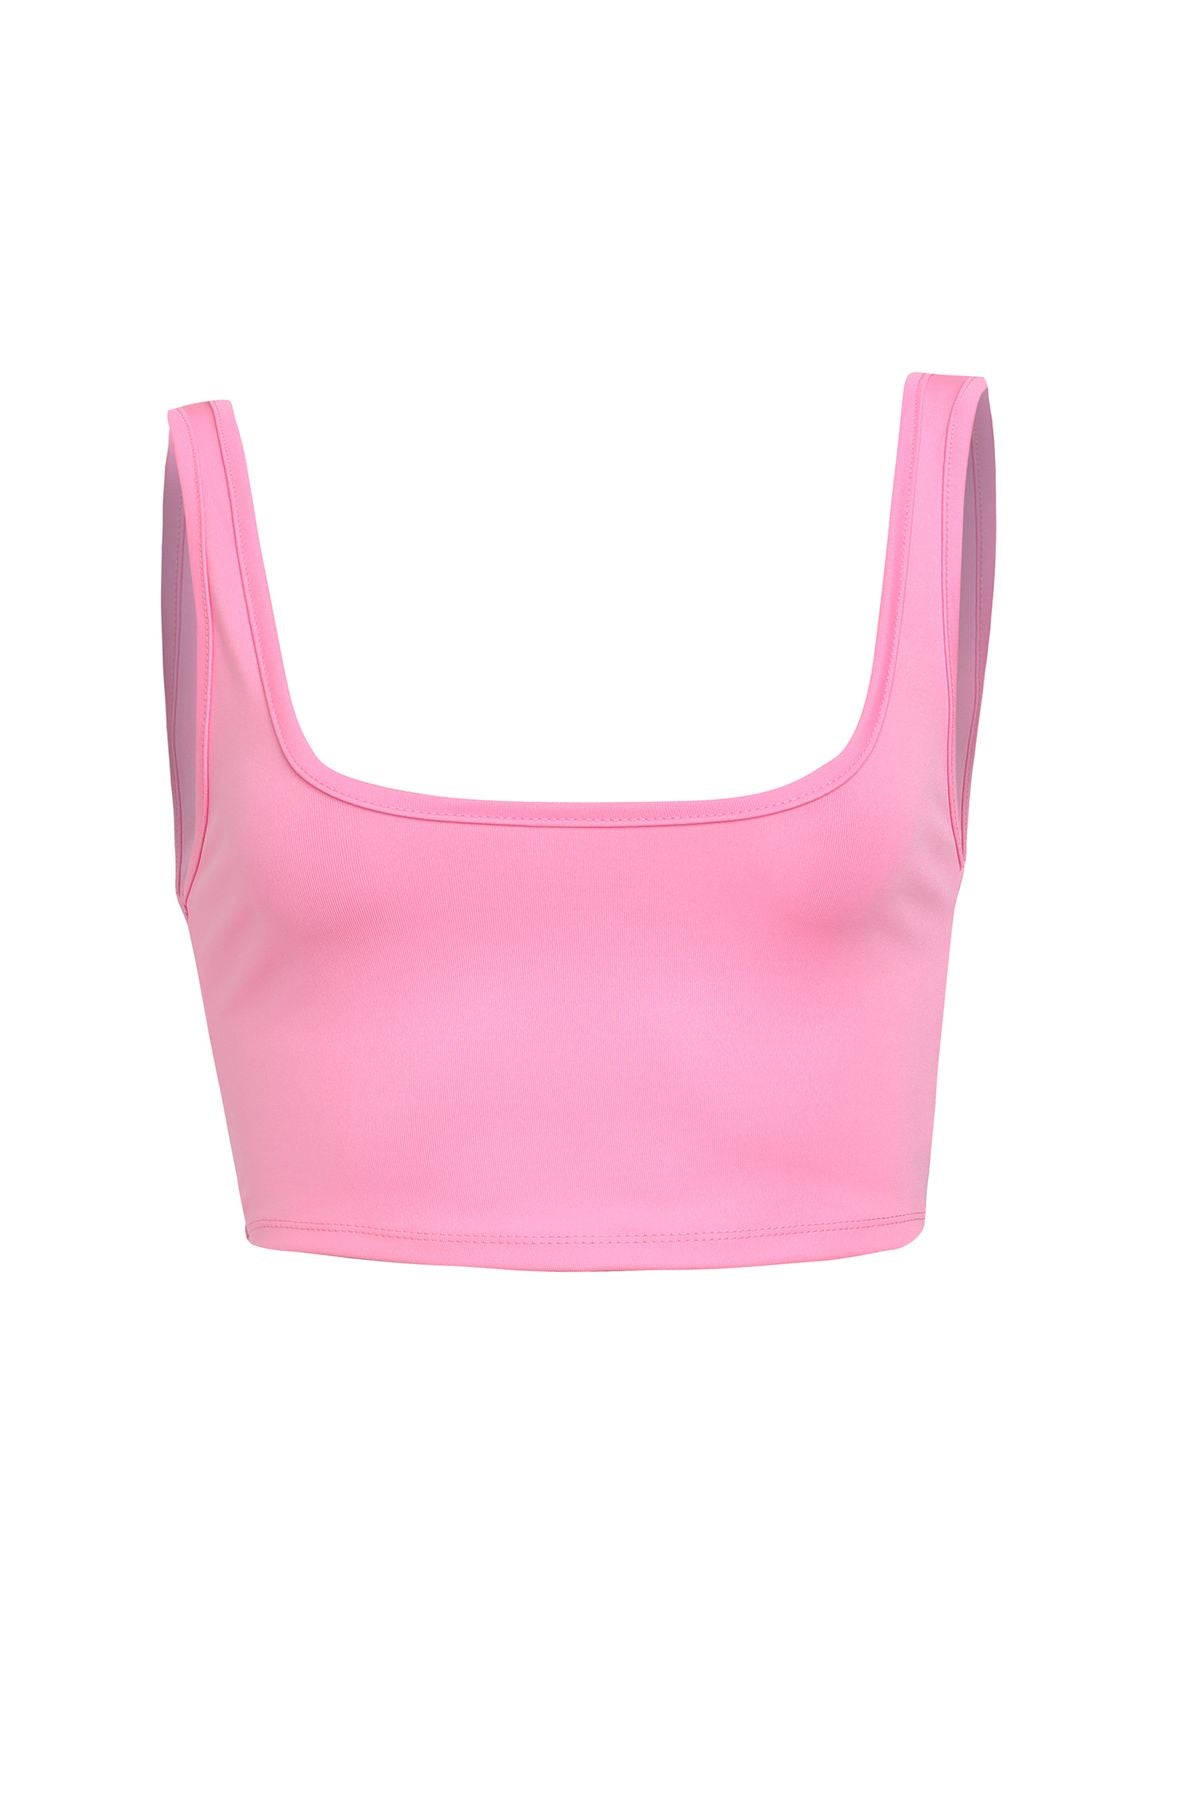 Thick Strap Bustier Candy Pink